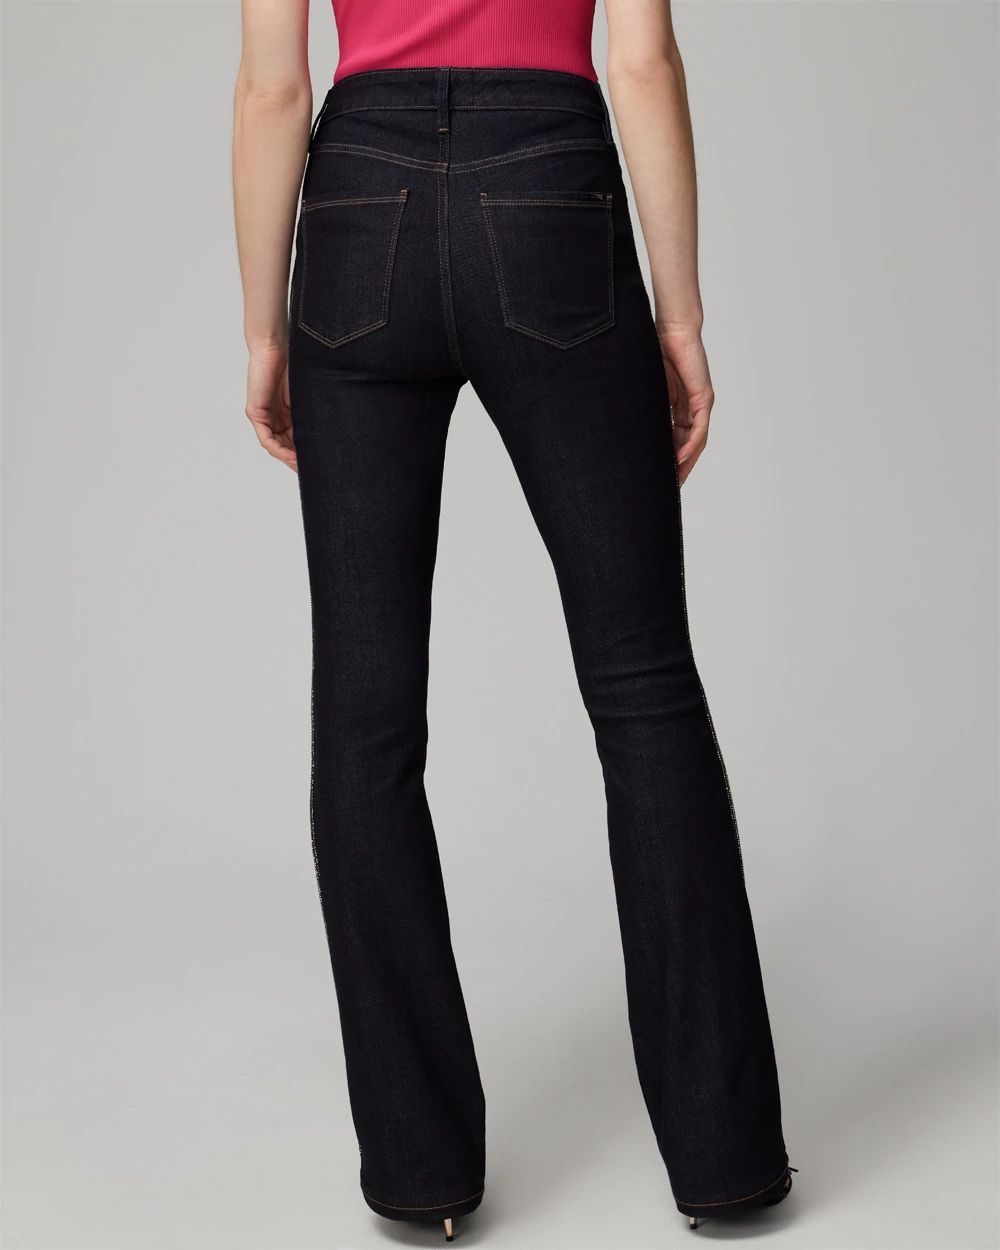 High Rise Sculpt Embellished Flare Jeans click to view larger image.